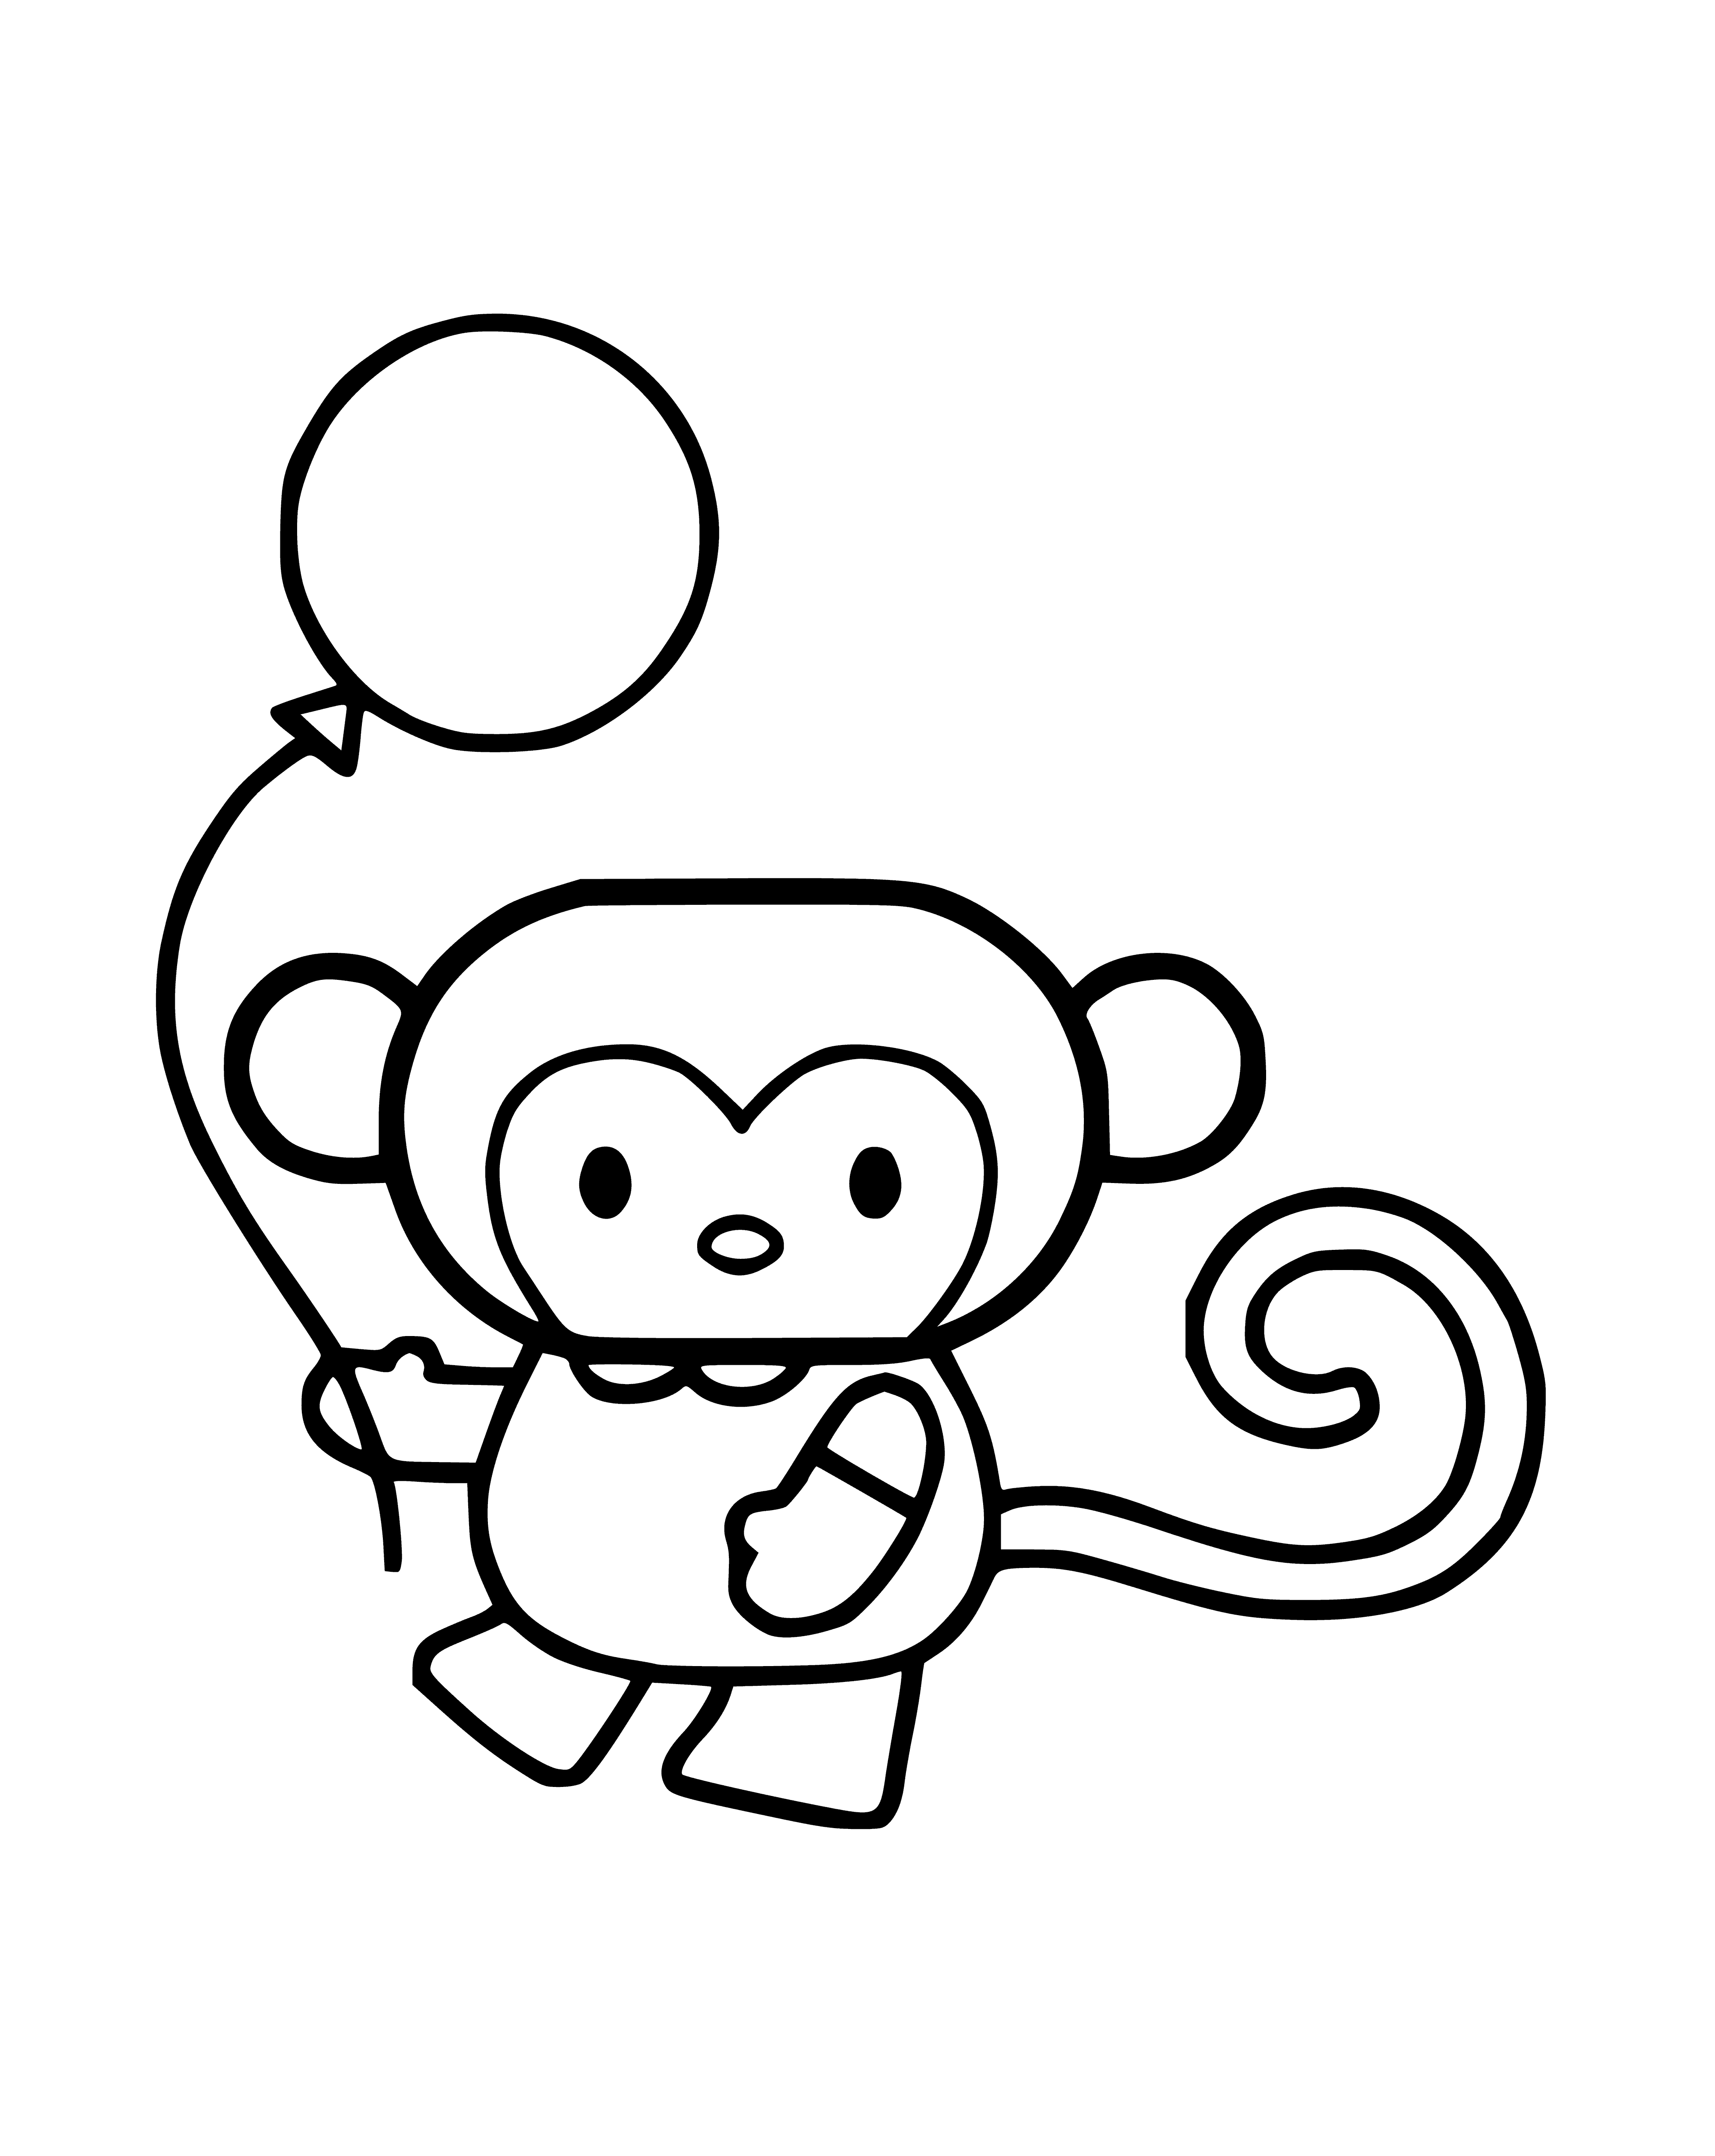 coloring page: Two smiling monkeys with open mouths, each holding a ball, a happy coloring page scene.